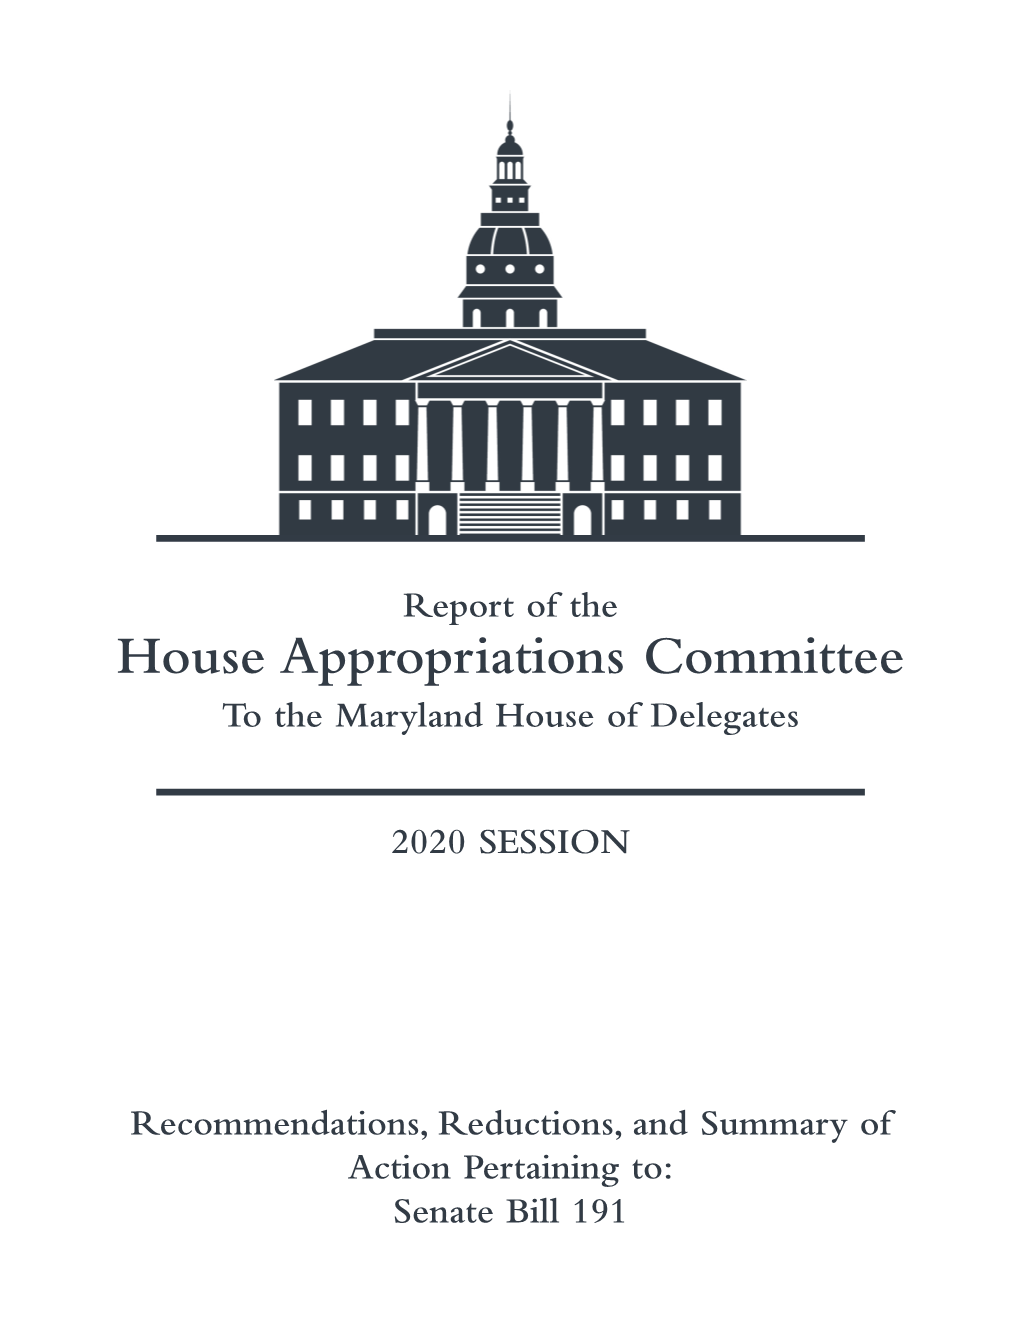 Report of the House Appropriations Committee to the Maryland House of Delegates